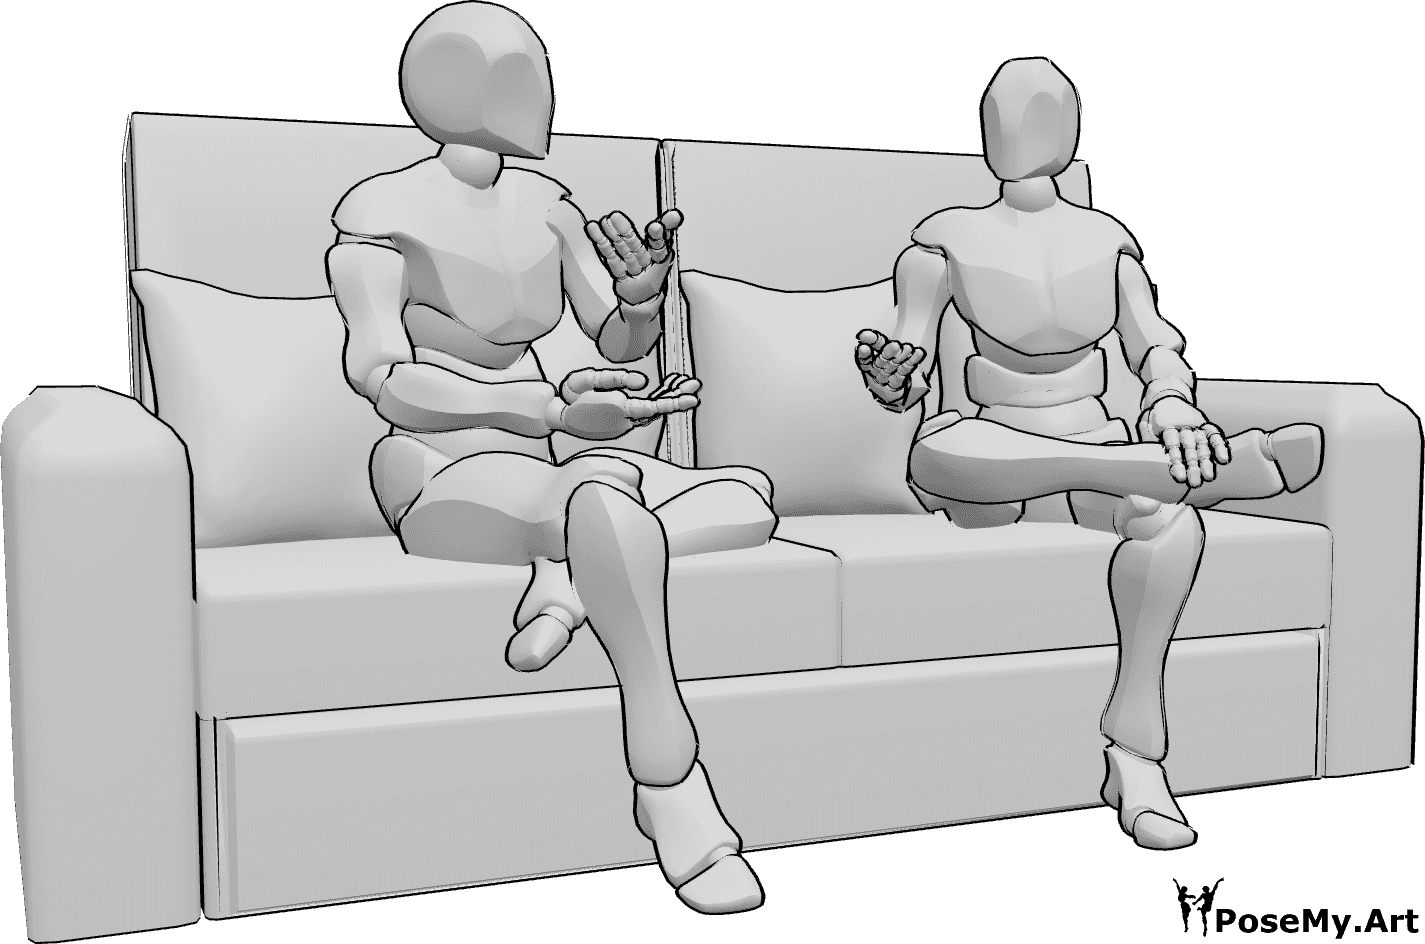 Pose Reference - Males sitting casual conversation pose - Two males are sitting on a couch and talking, having a casual conversation